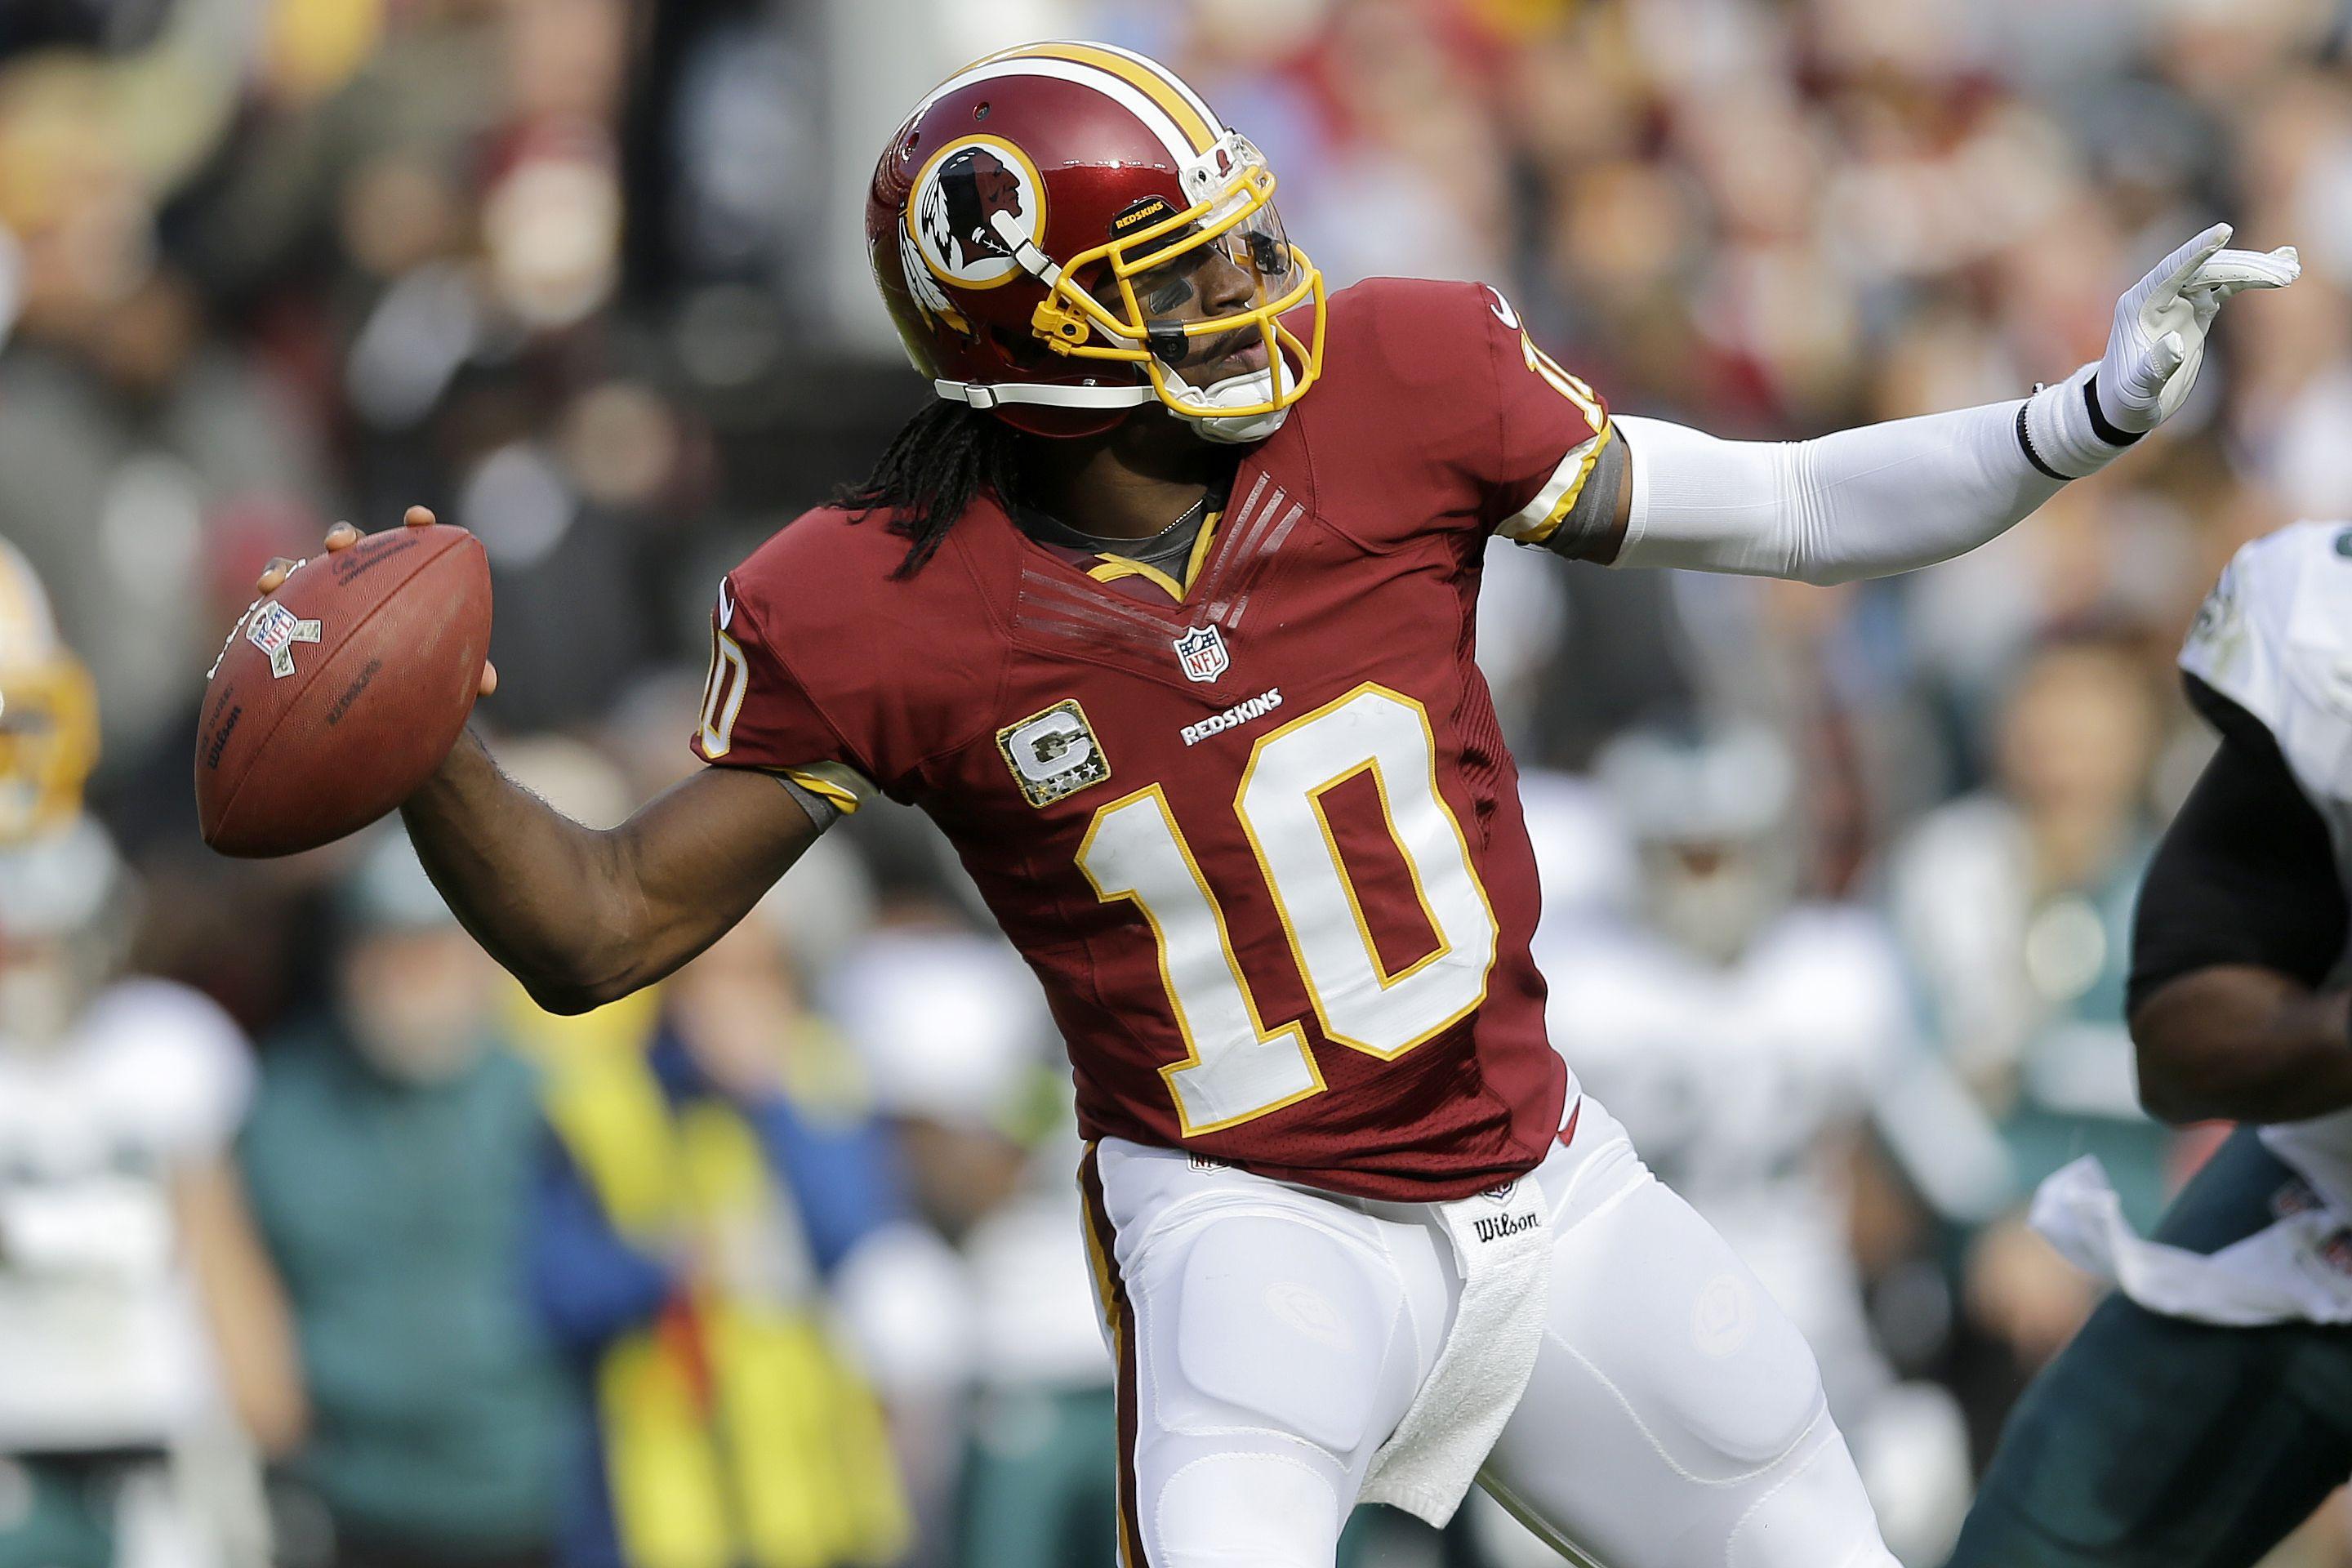 Juicy Truths You Did Not Know About Robert Griffin III